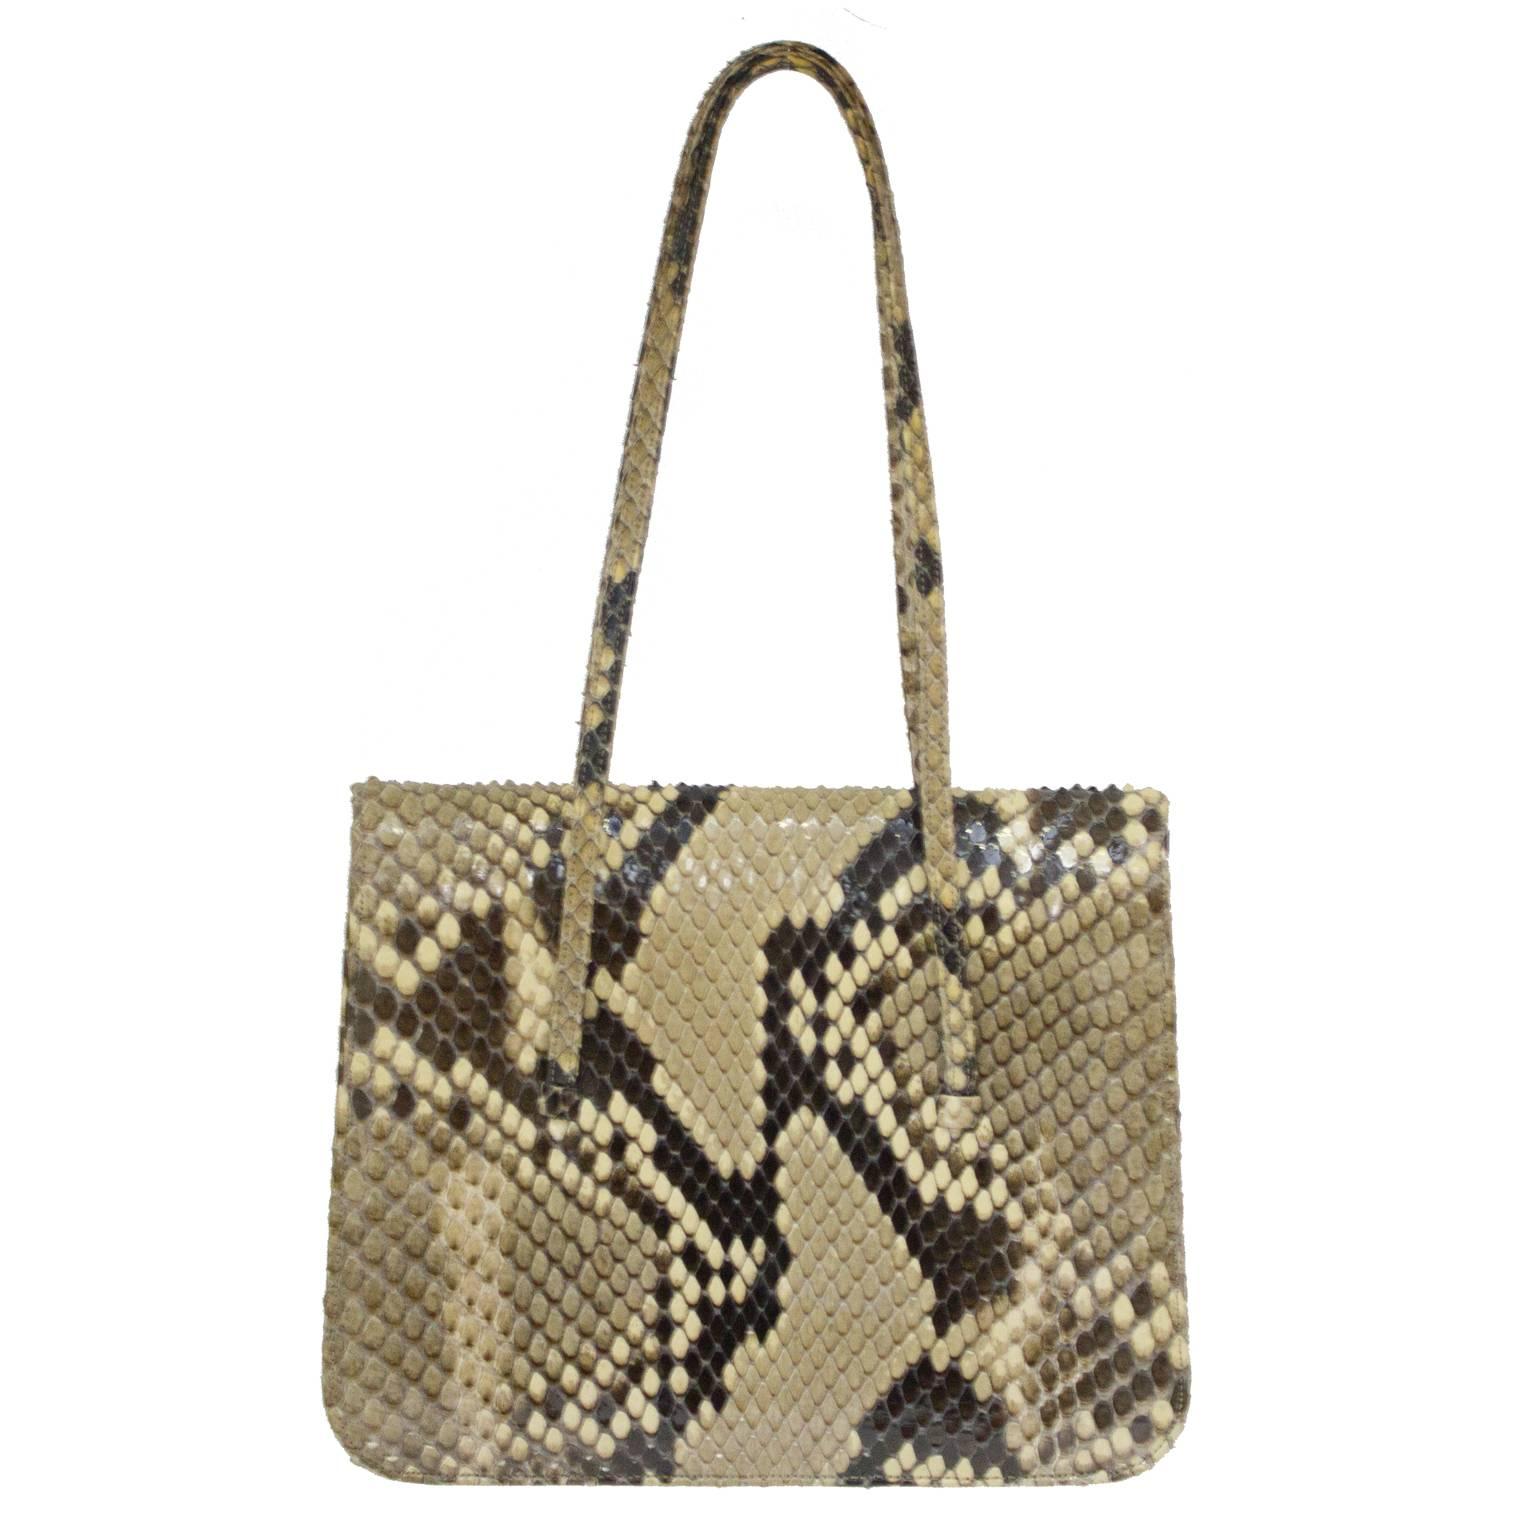 Judith Leiber python mini double handle handbag from the 1980's. Bag has two straps, and a mini flap that closes with a magnetic snap button. The interior has two pockets and is lined in beige grosgrain satin. Excellent condition. 